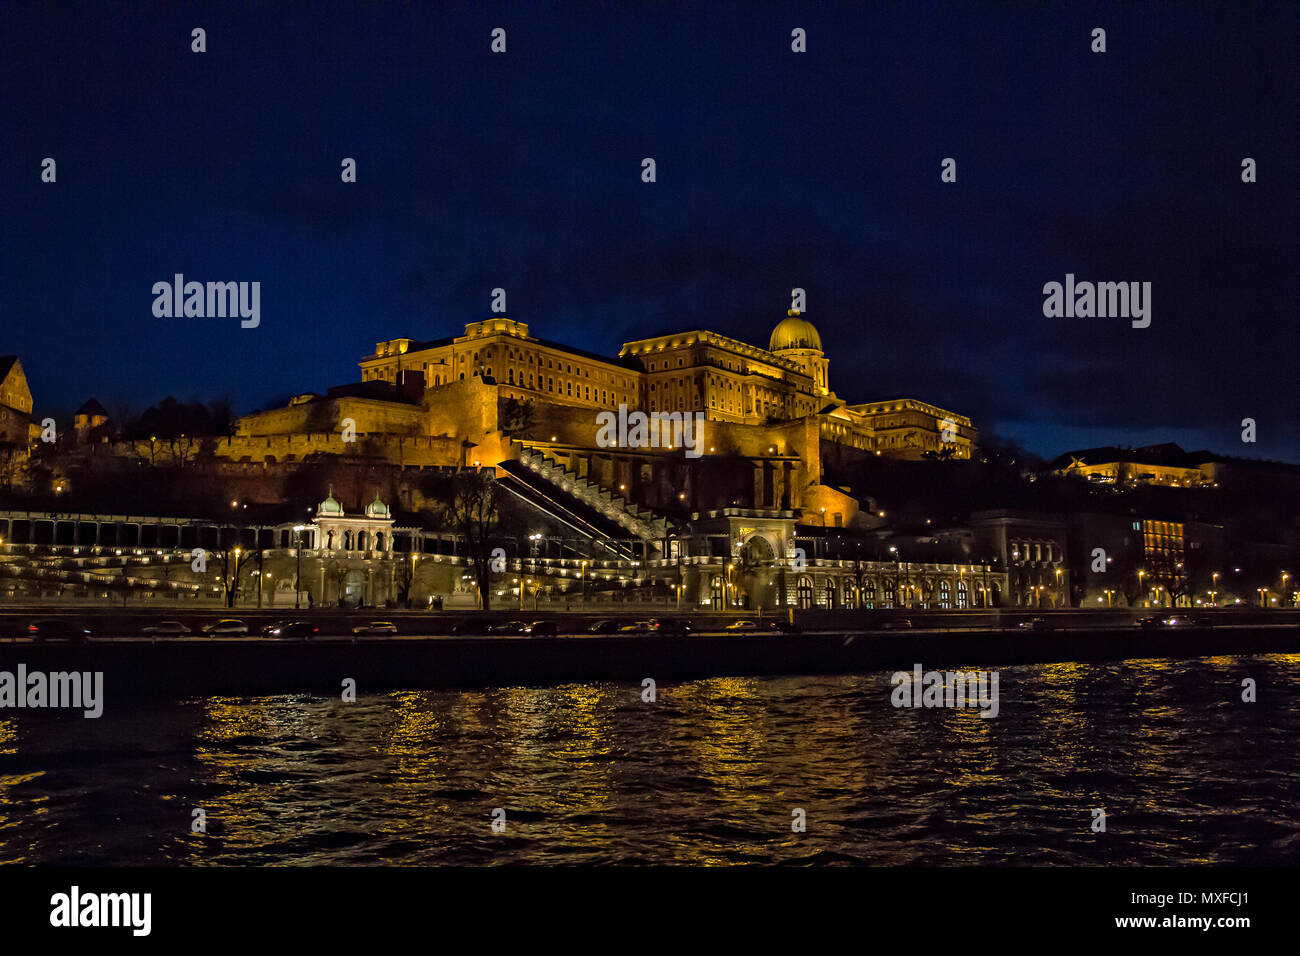 View over Buda side of Budapest with illuminated Buda castle and Danube river from viewpoint on a touristic motor ship at night in Budapest, Hungary Stock Photo